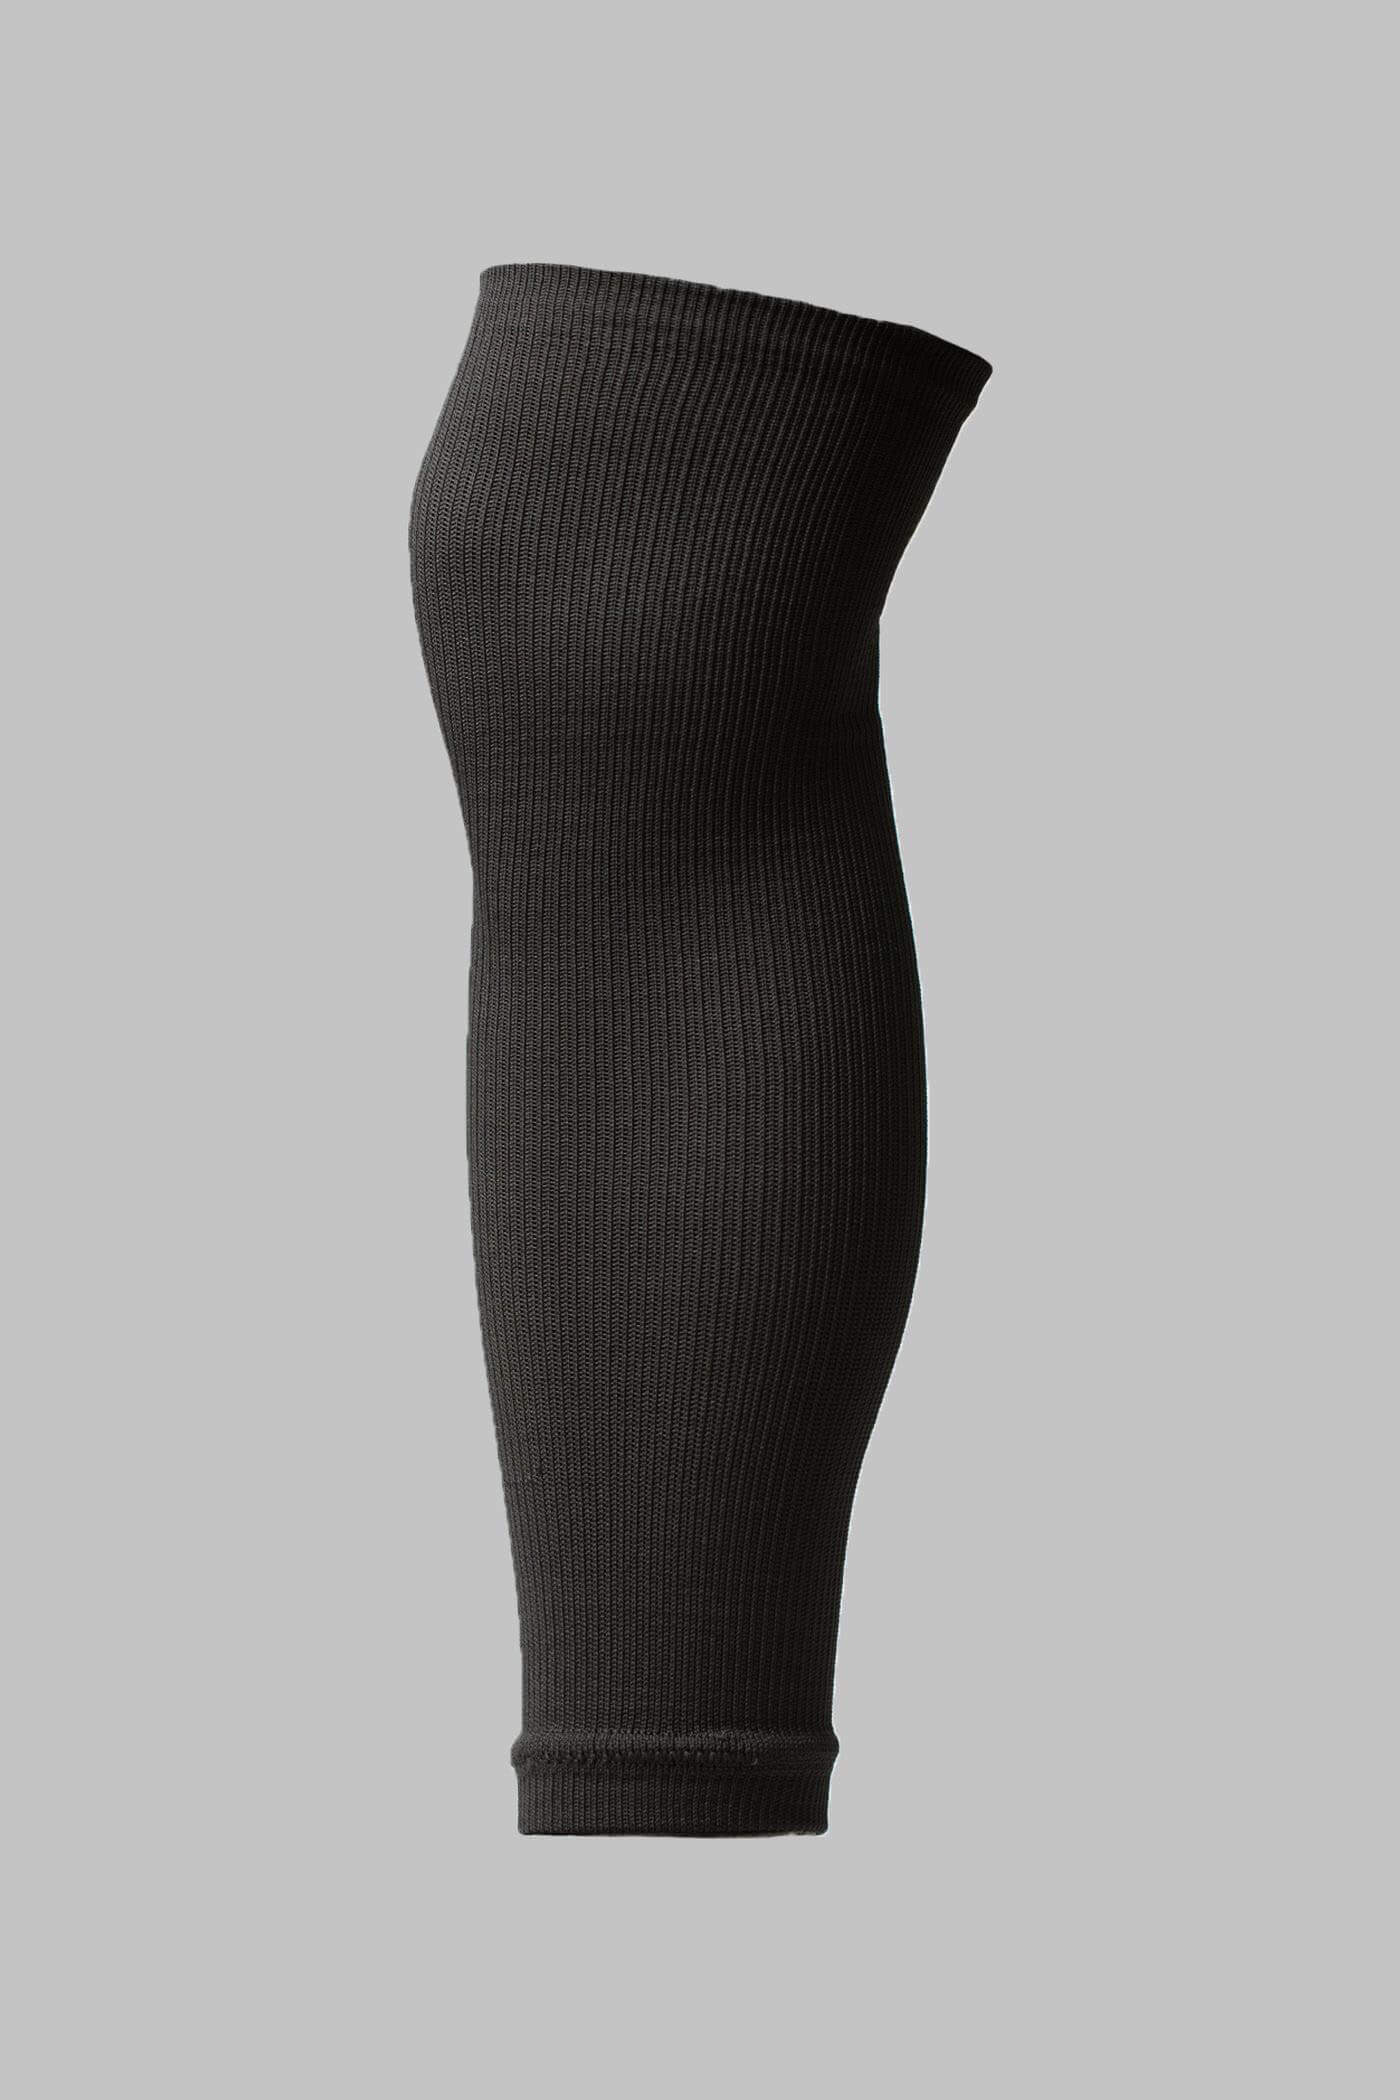 How to wear GTE #gaintheedge #gripsocks #howto #soccer #football, grip sock  football